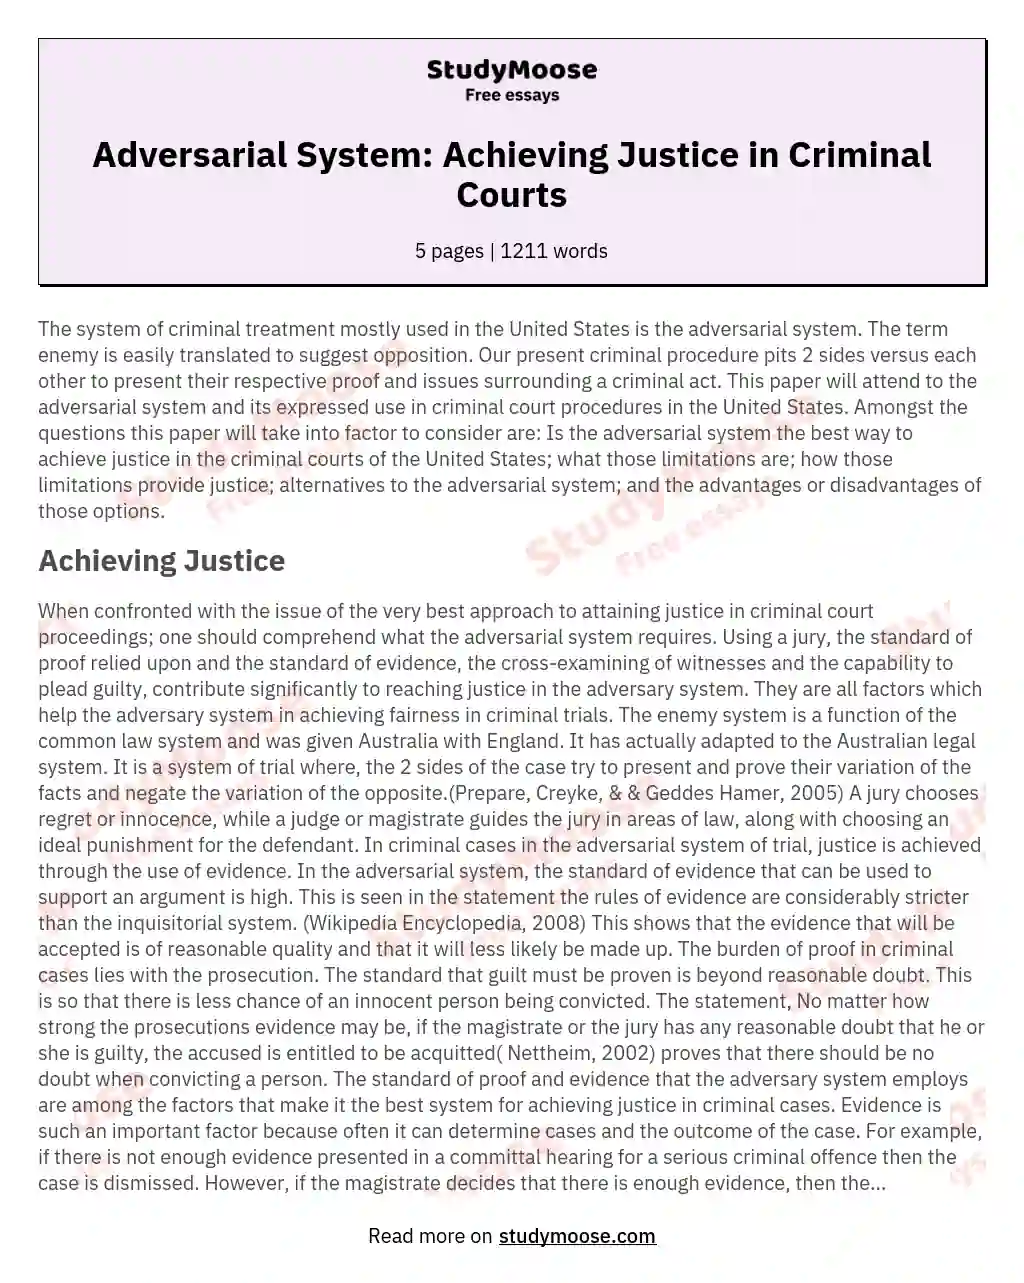 Adversarial System: Achieving Justice in Criminal Courts essay